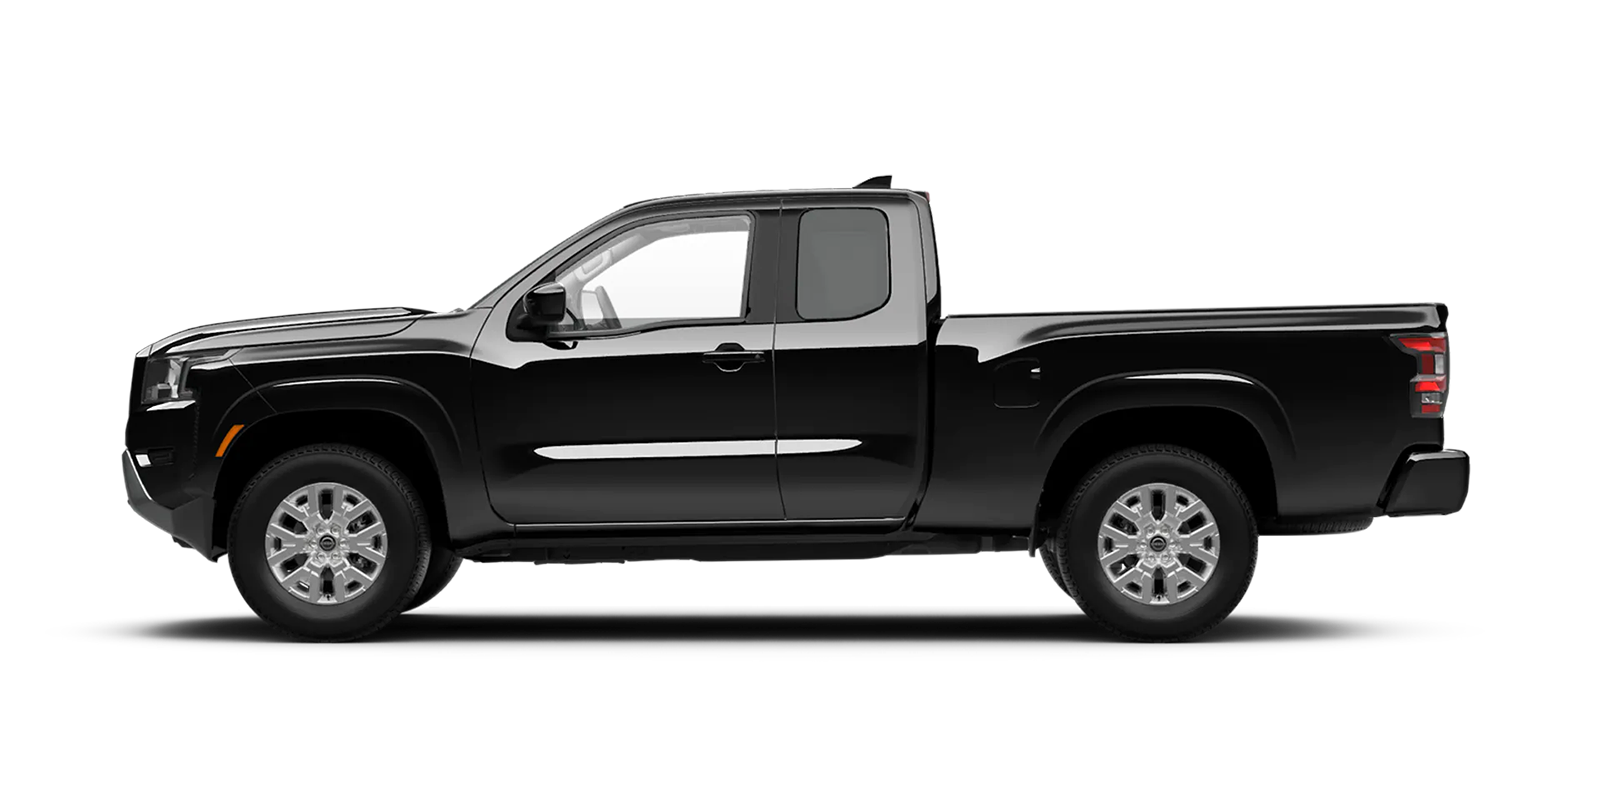 2022 Frontier King Cab SV 4x2 in Super Black | Courtesy Nissan PA in Altoona PA